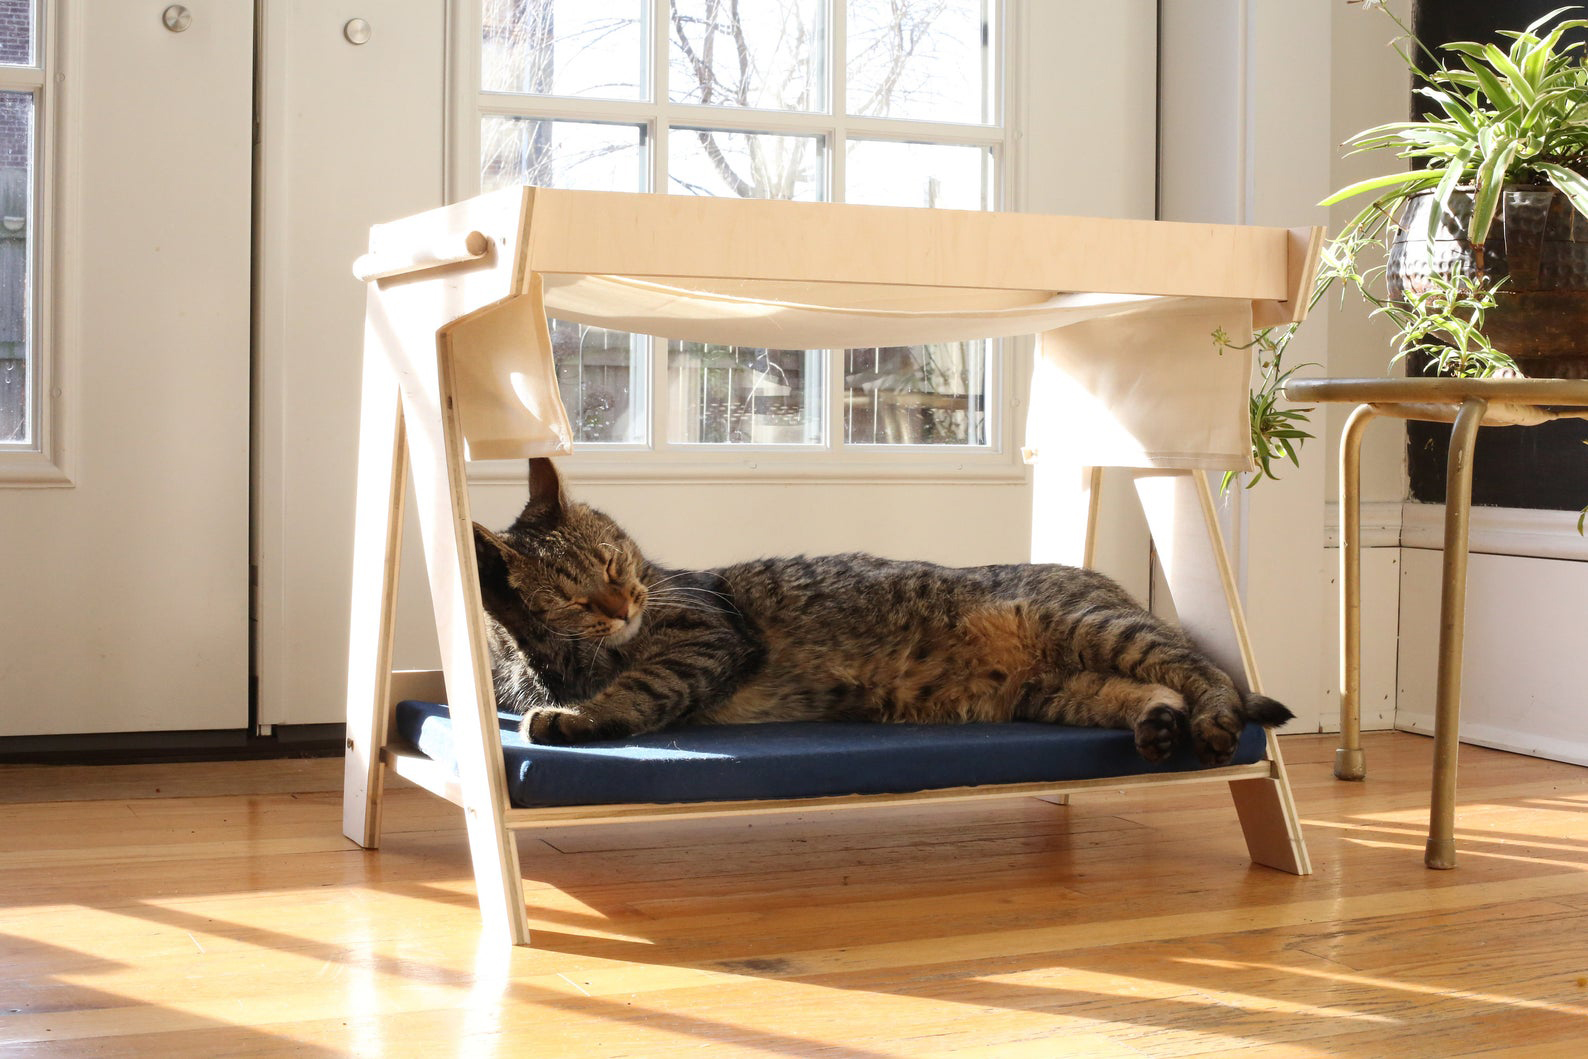 Mid Century Modern Inspired Cat Bunk, How To Make Cat Bunk Beds